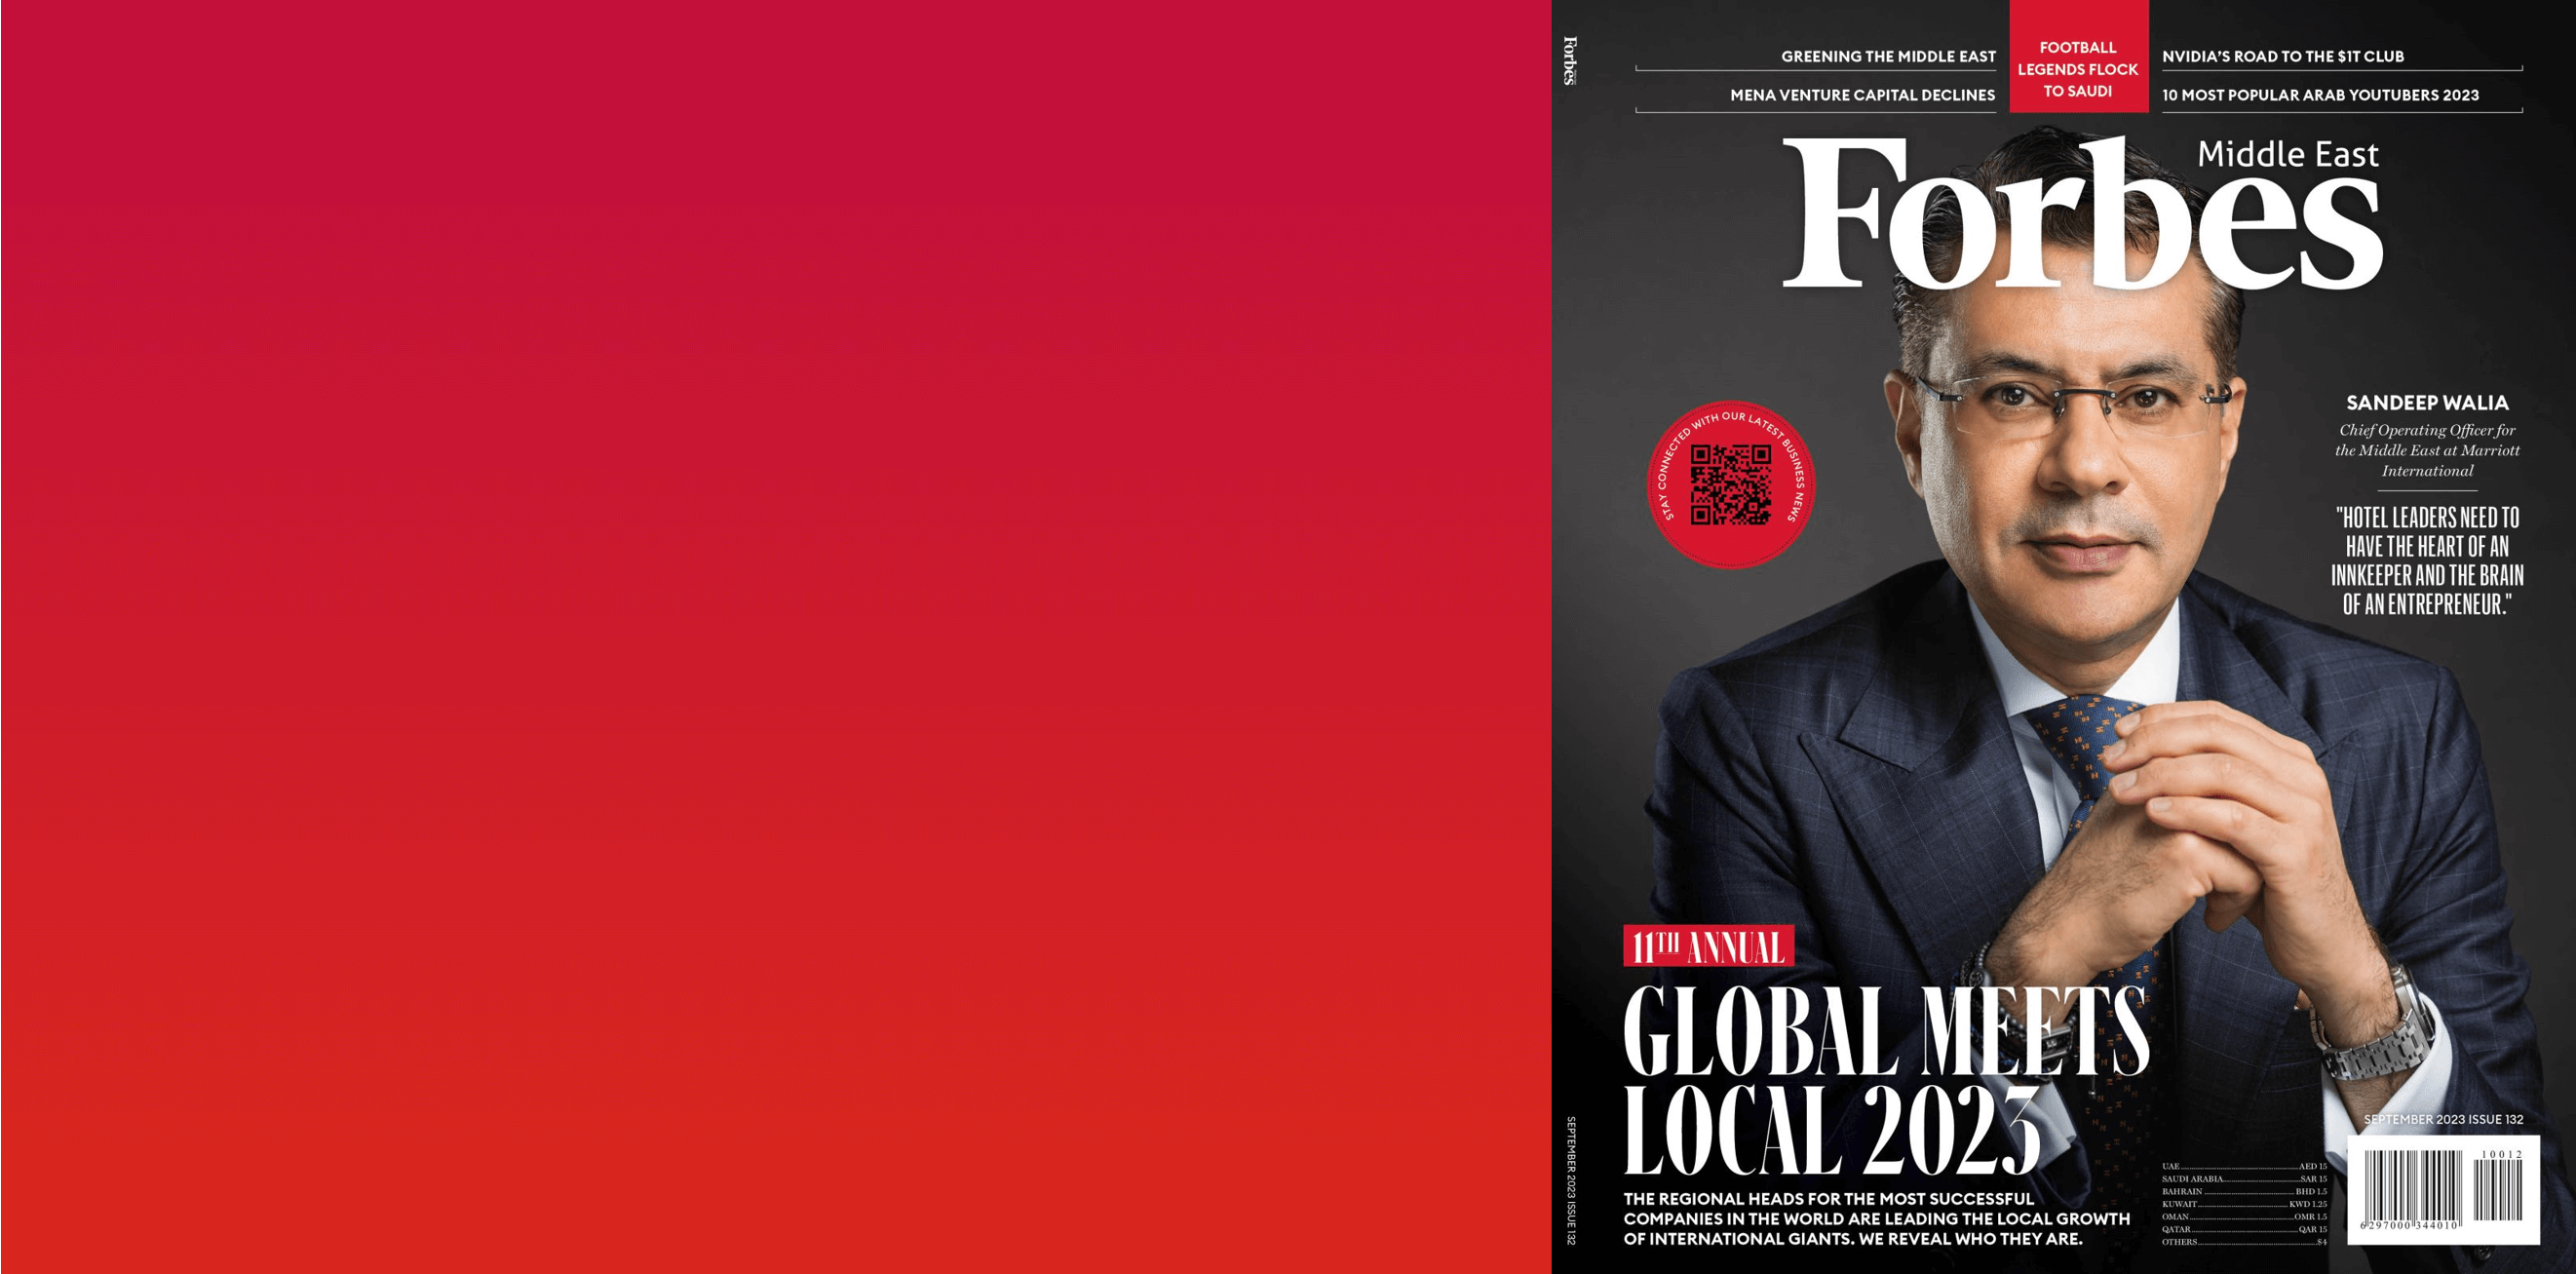 Forbes Middle East “Global Meets Local 2023”